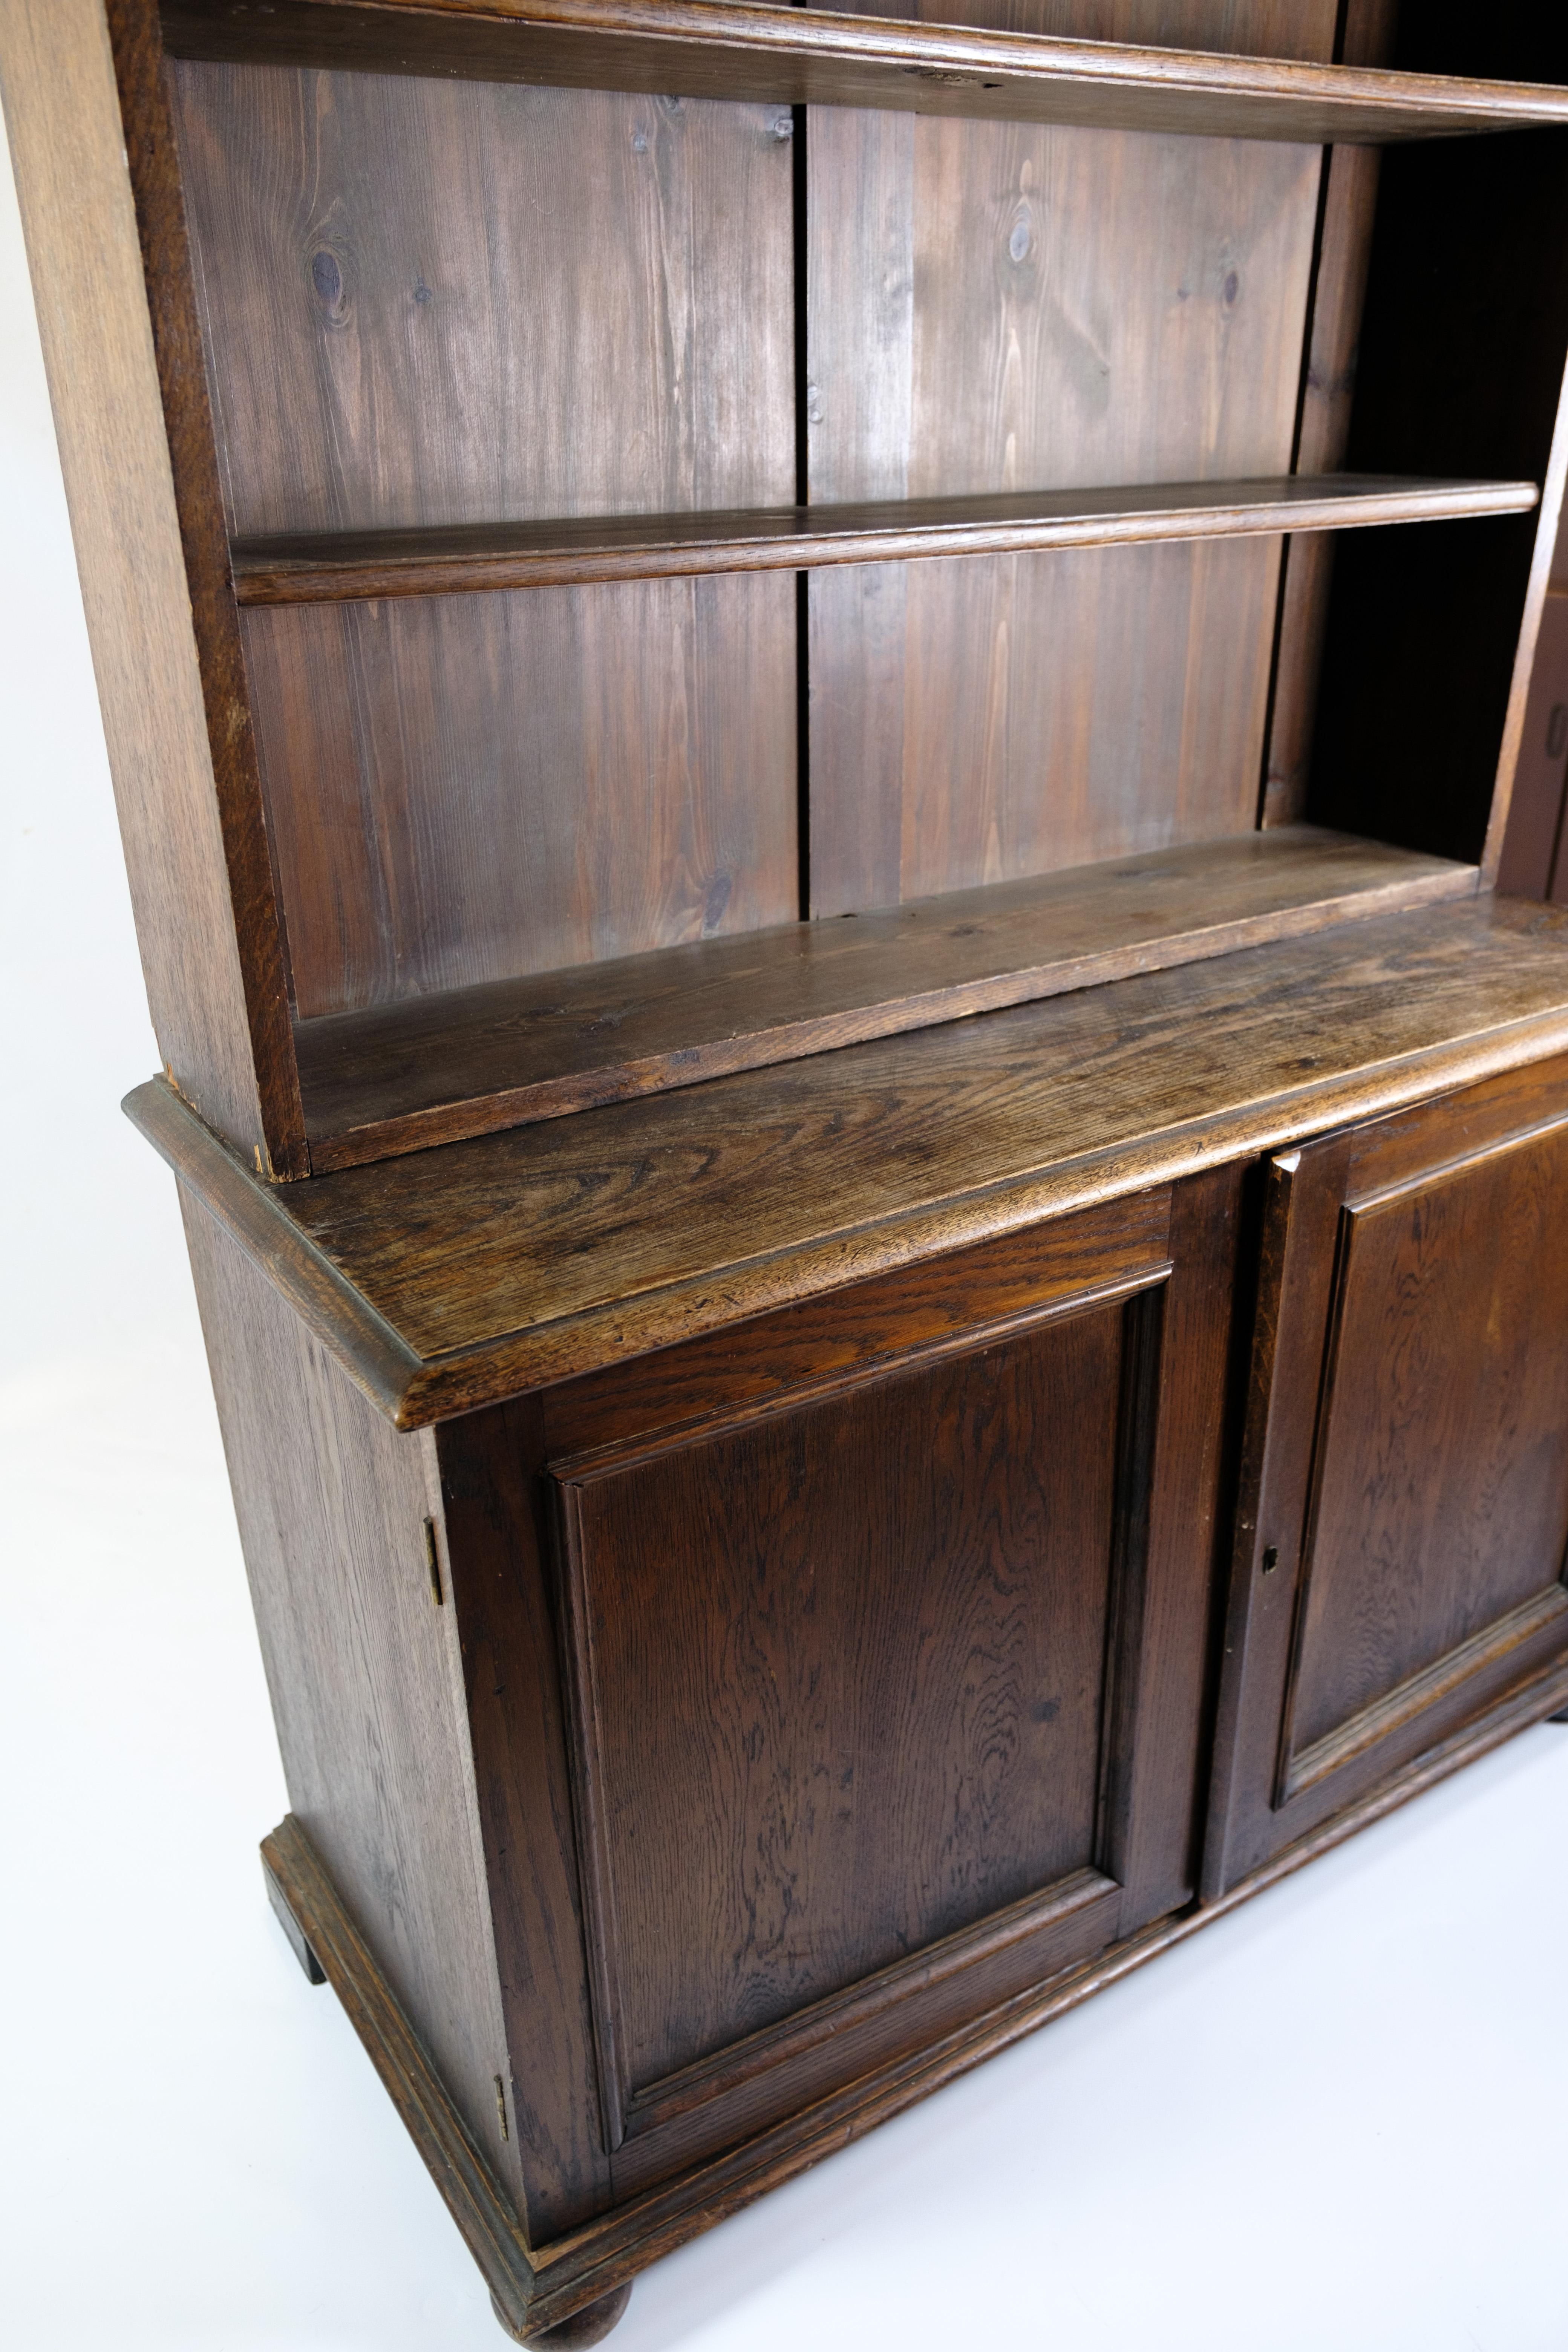 This tall bookcase in oak from 1890 year is an exemplary piece of furniture craftsmanship with both elegance and functionality. It is equipped with a lower sideboard with two cabinet doors and a bookcase with six shelves, providing ample storage